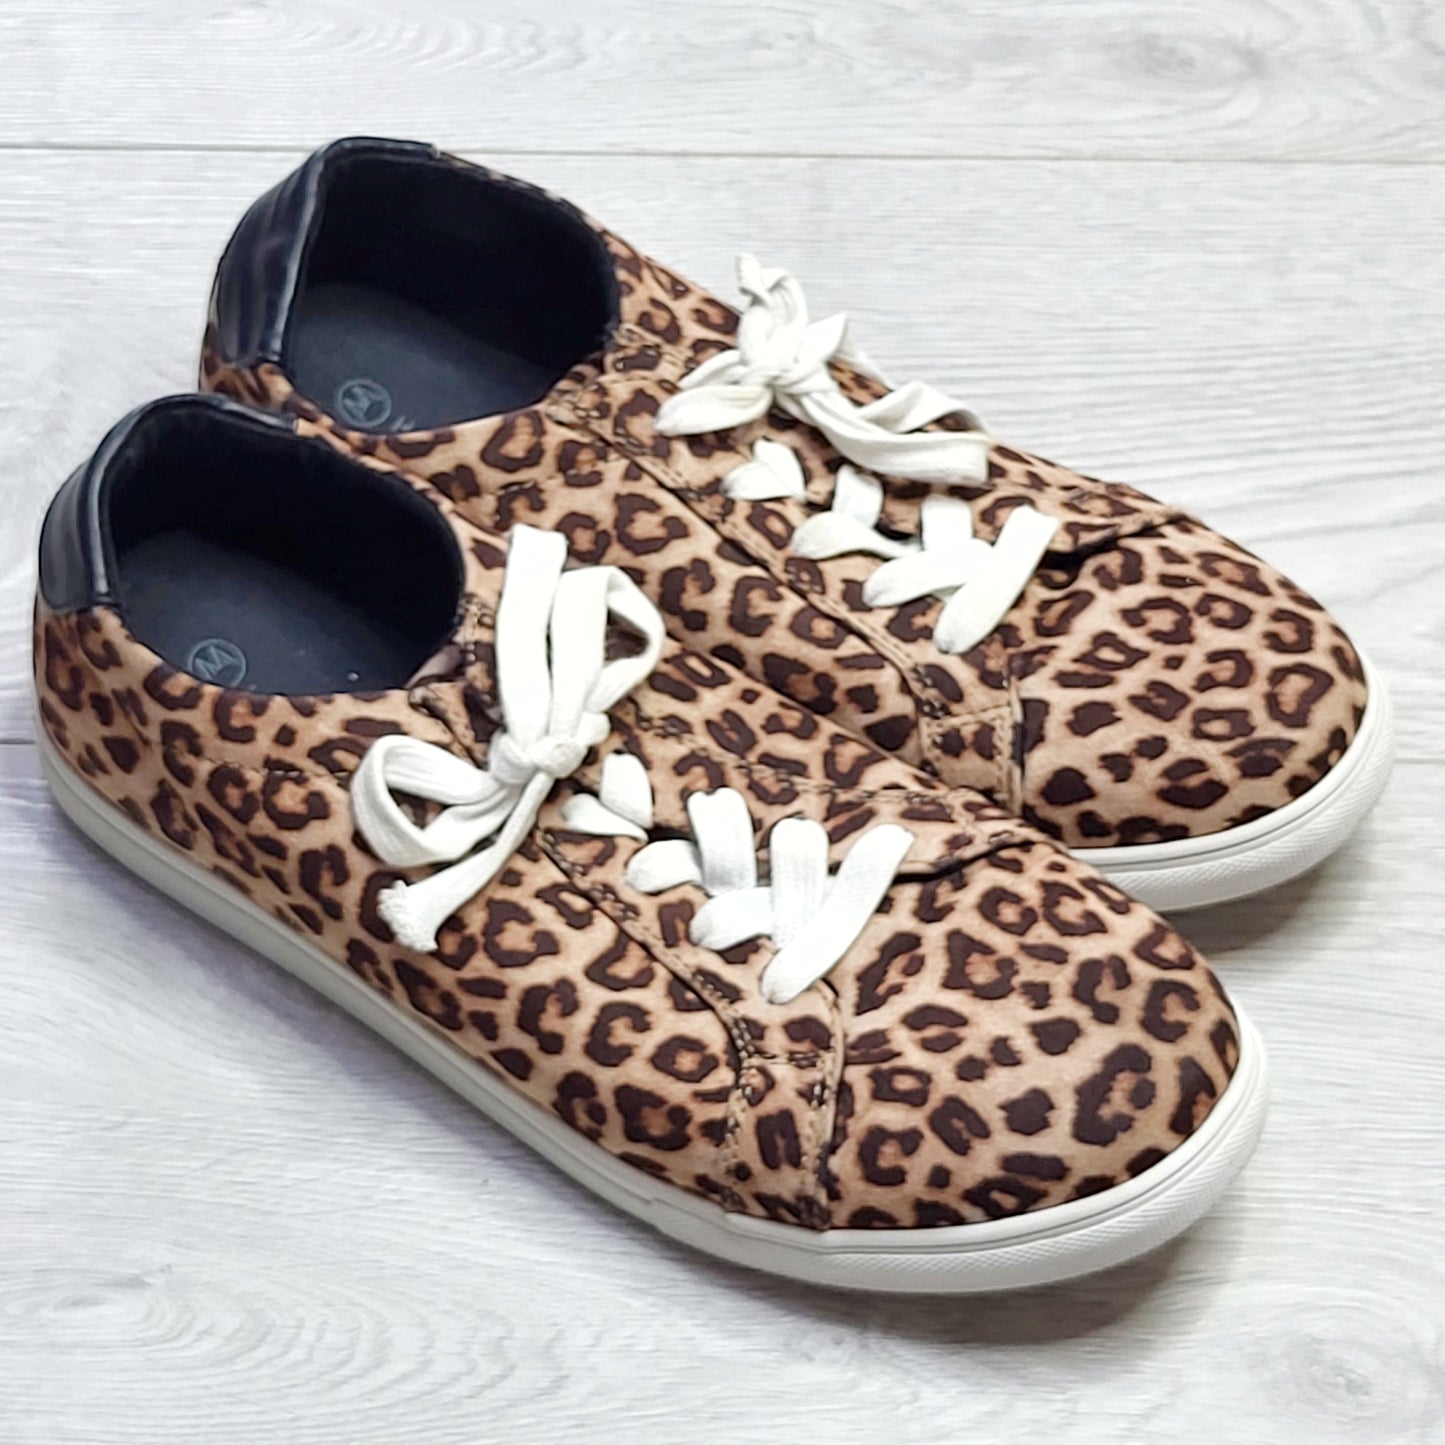 House of Harlow leopard print shoes, size 10, good condition